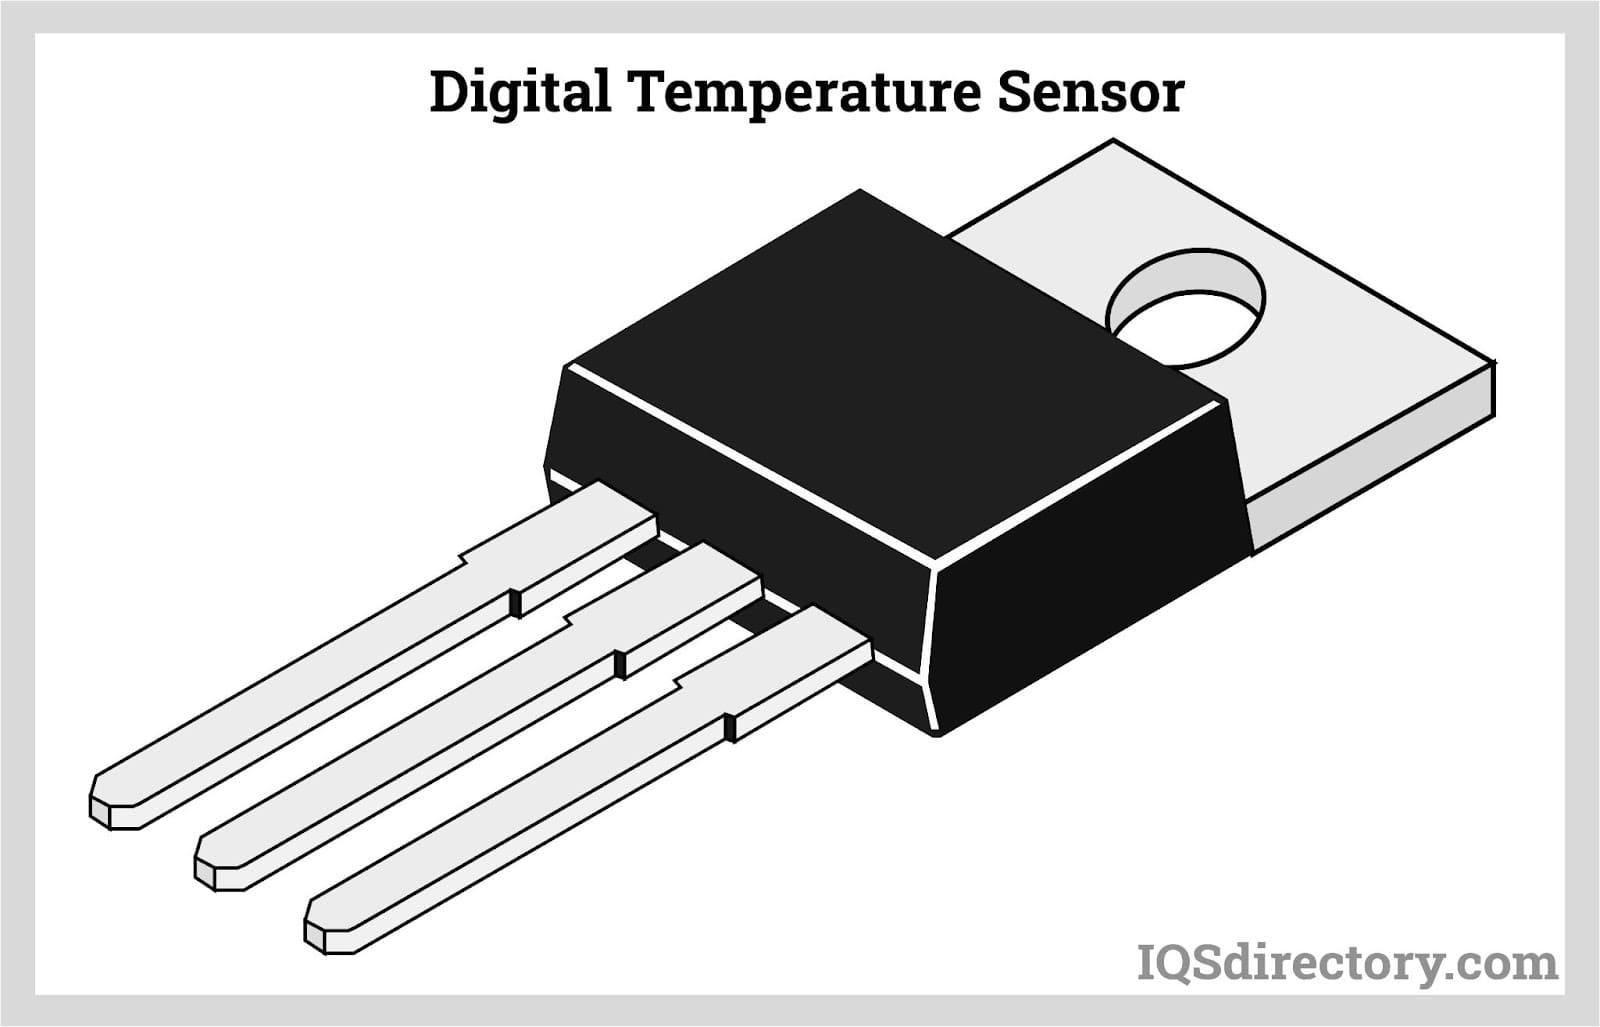 Types of Temperature Measuring Devices